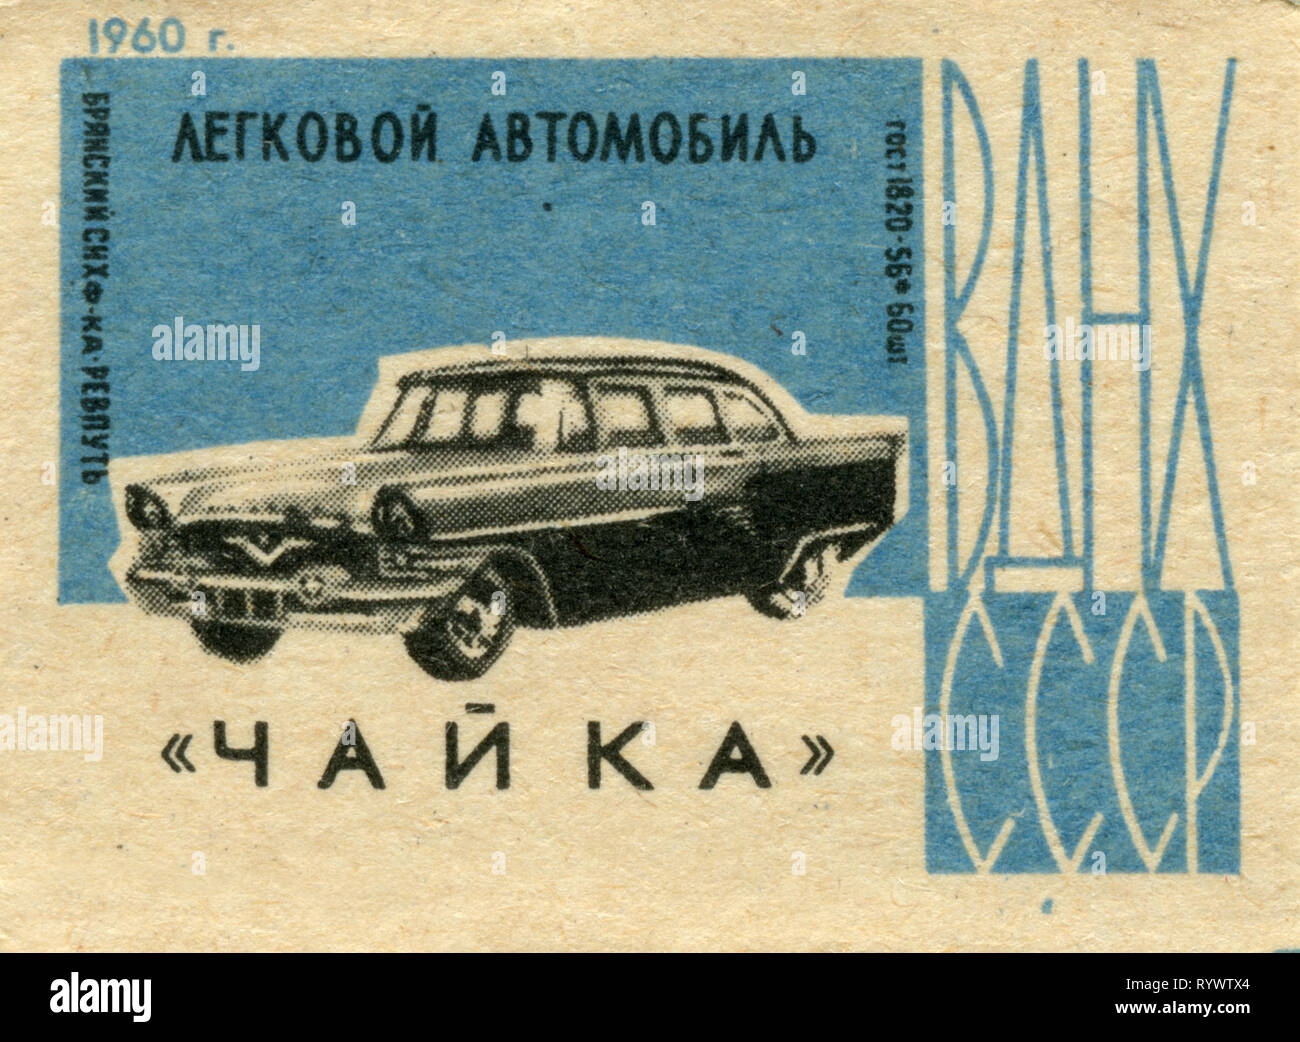 Russia, Soviet Union - 1960: matchbox graphics collection, 'USSR Exhibition of Achievements of National Economy, motor car Chaika' Stock Photo